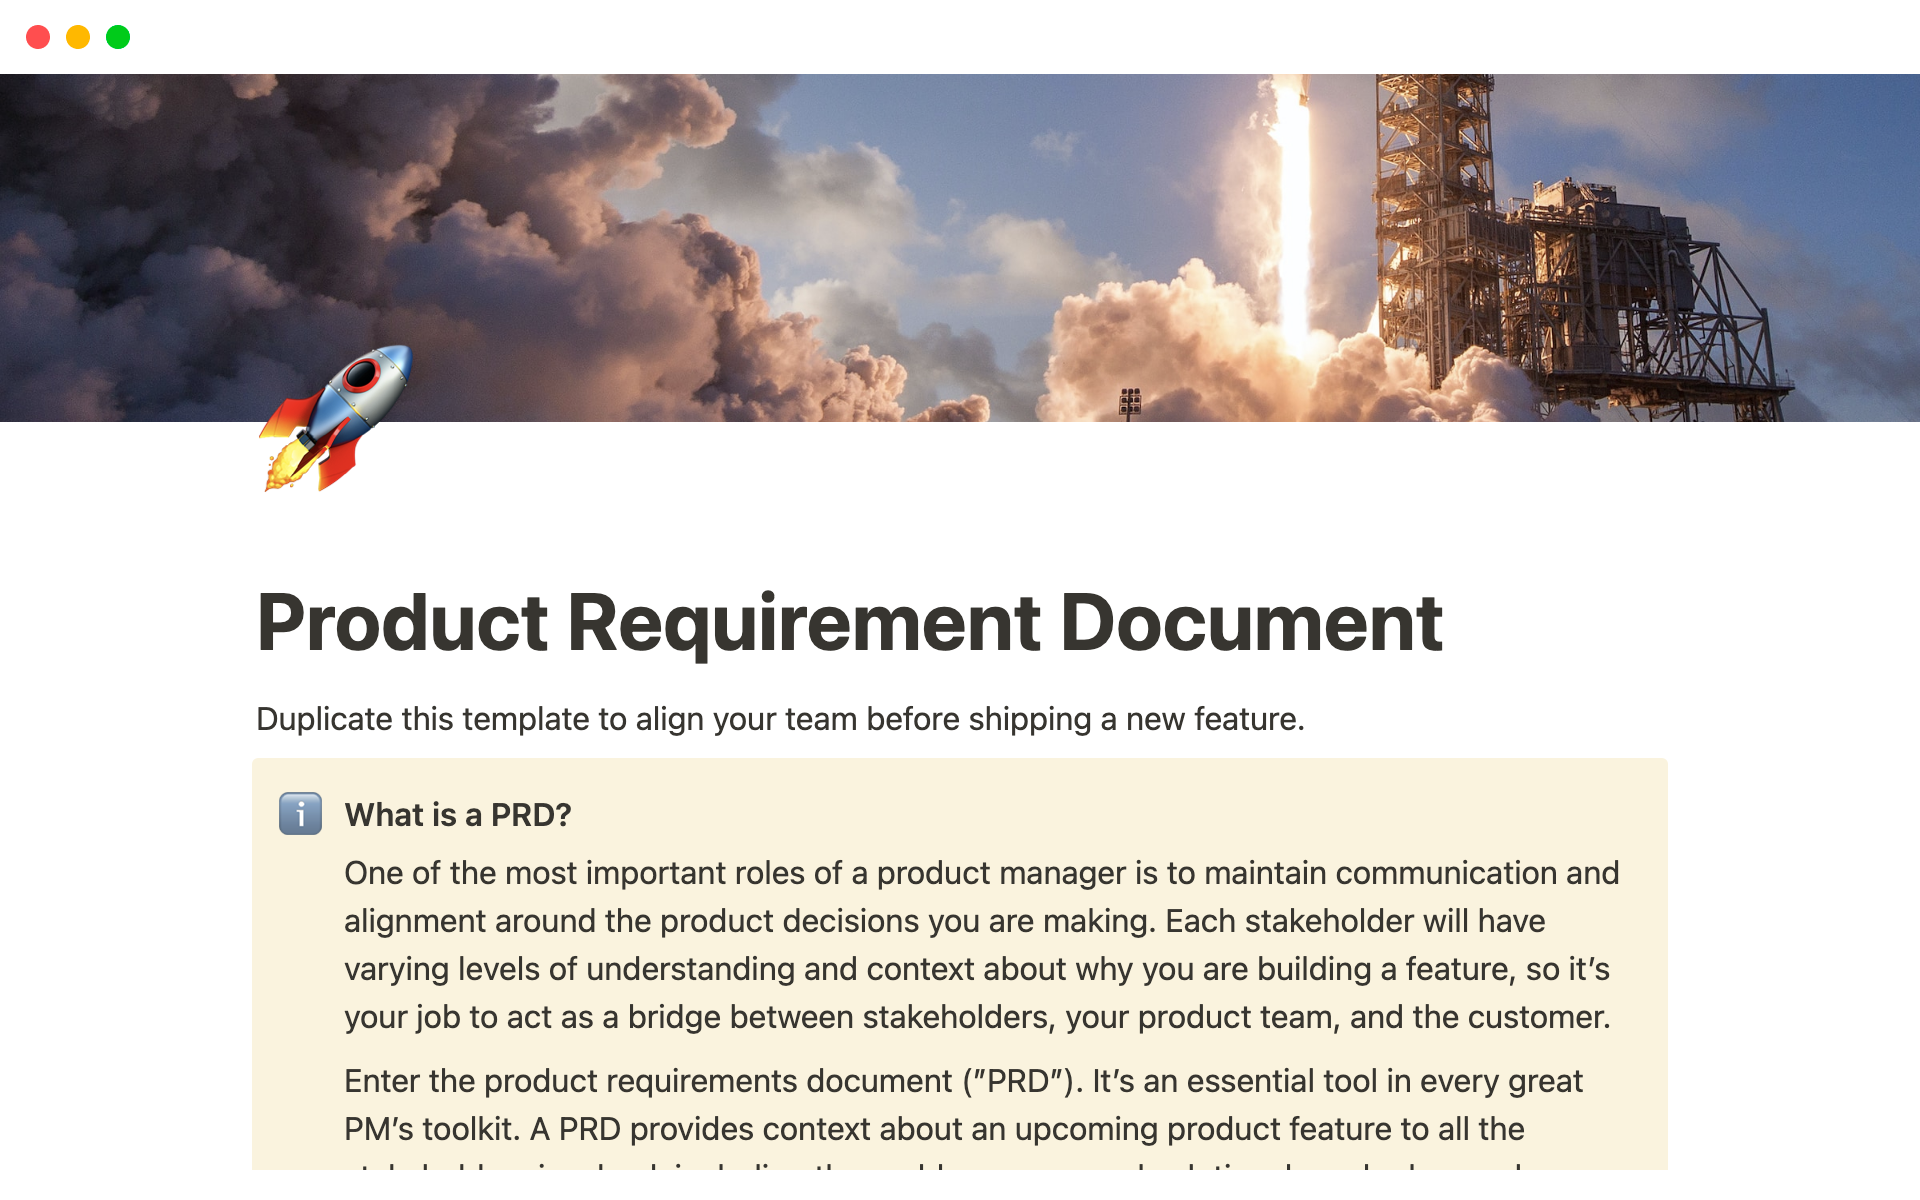 Get a comprehensive guide to defining the scope and requirements for your product development process with the PRD template for Notion, featuring AI-generated examples and guidance for each section.